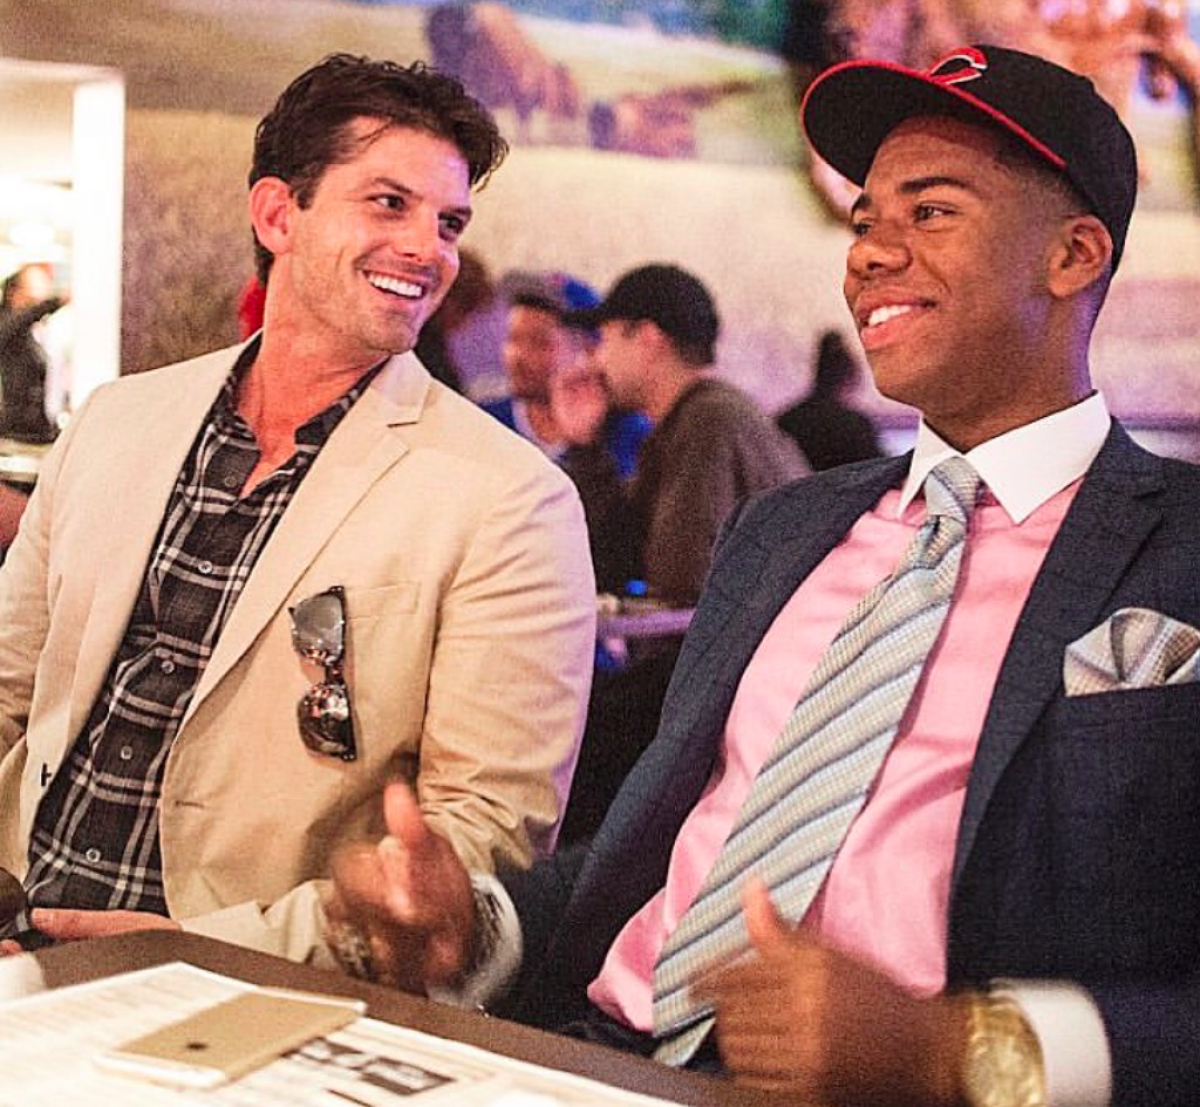 Sports agent Ryan Hamill, left, and Hunter Greene, who was taken second overall by the Cincinnati Reds in the 2017 draft